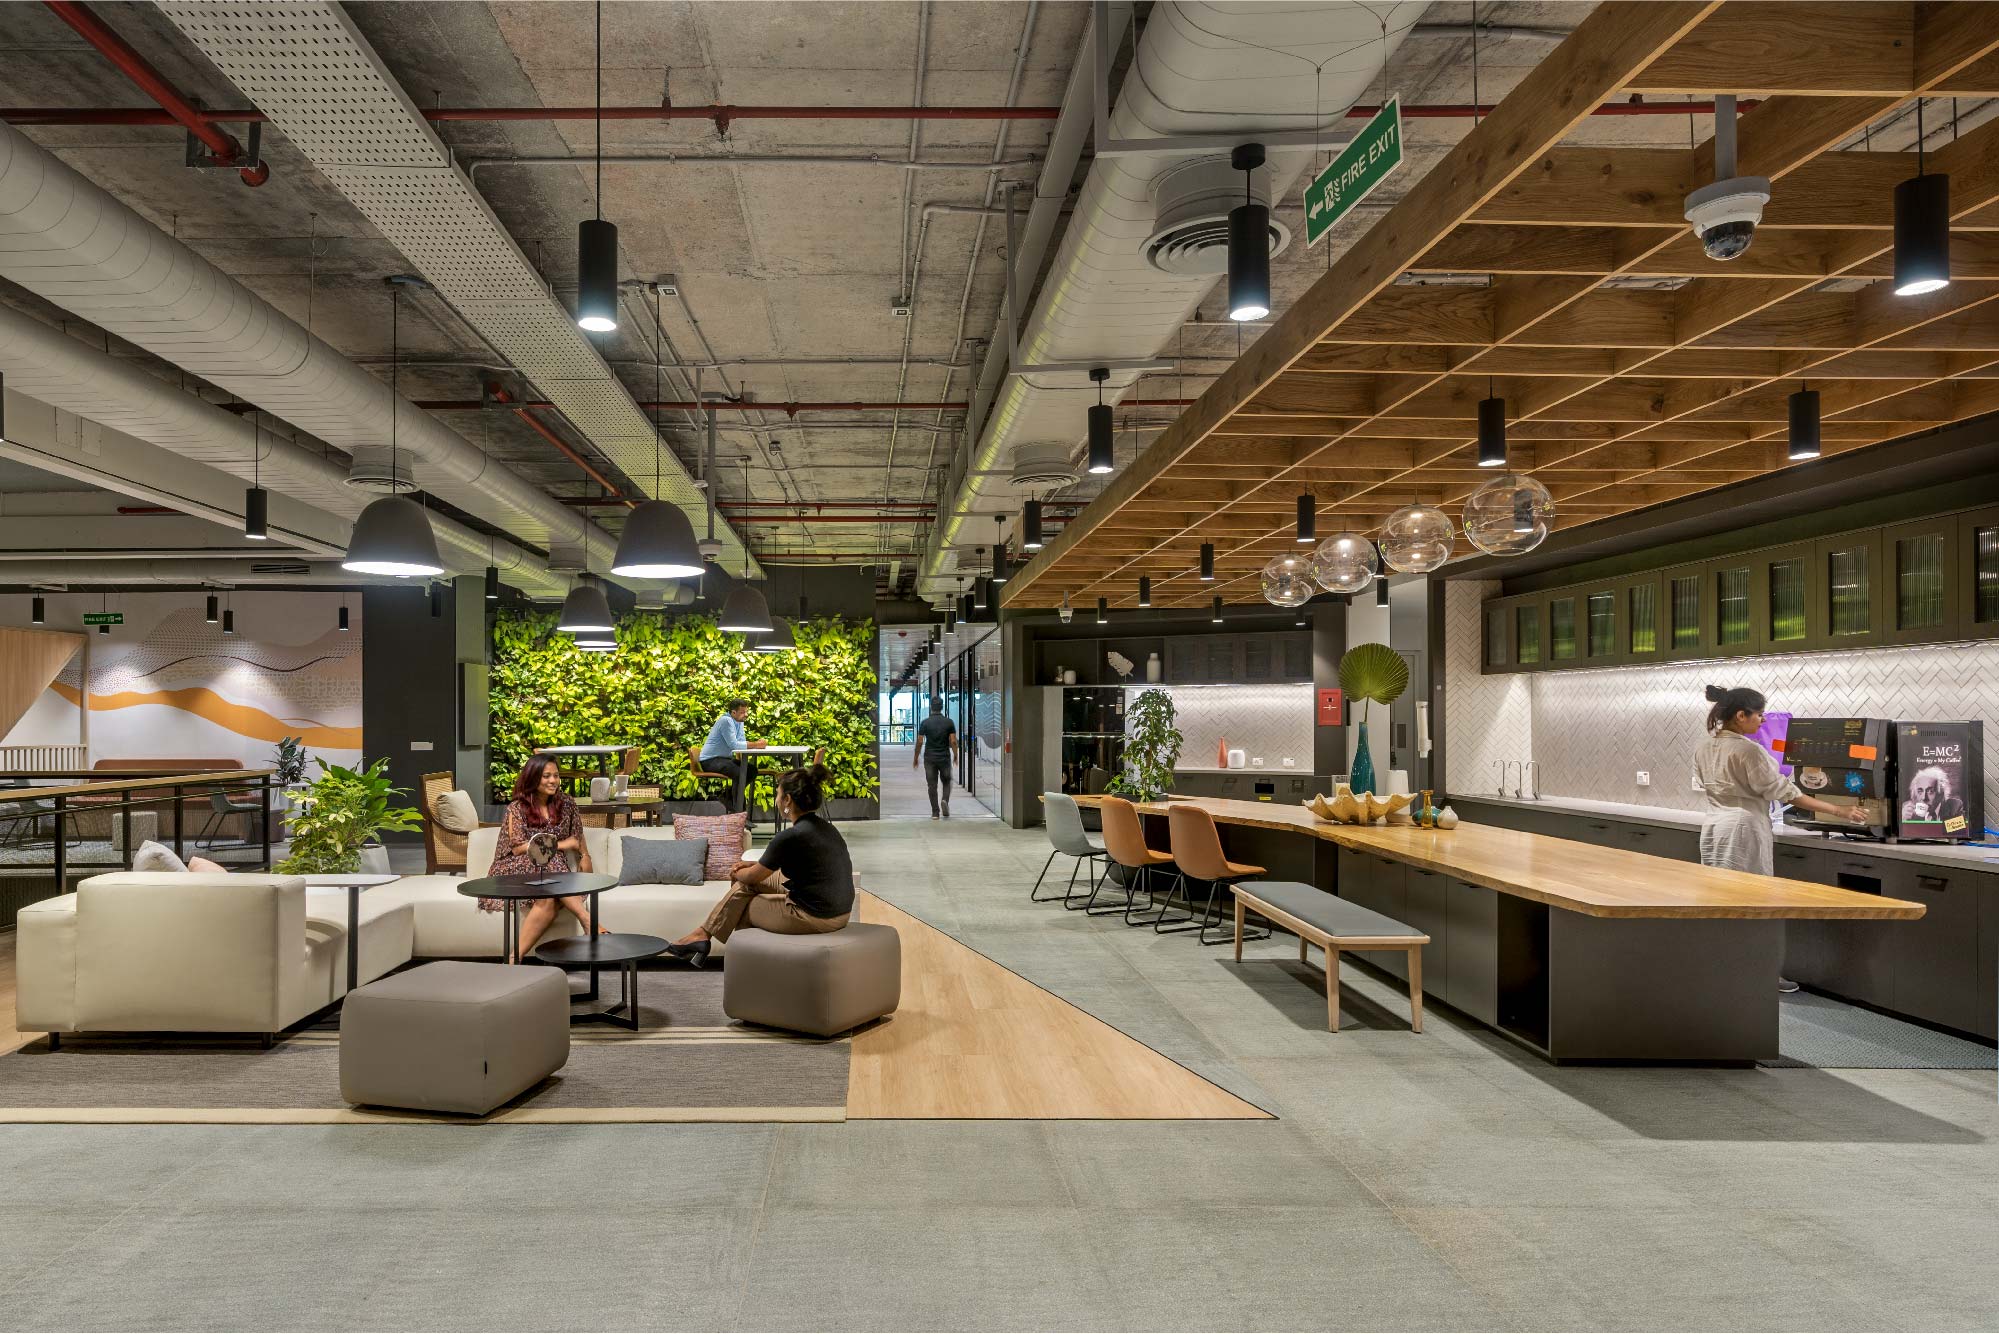 Legato's office - workspace that upholds their culture of diversity and inclusion, amalgamates latest technologies